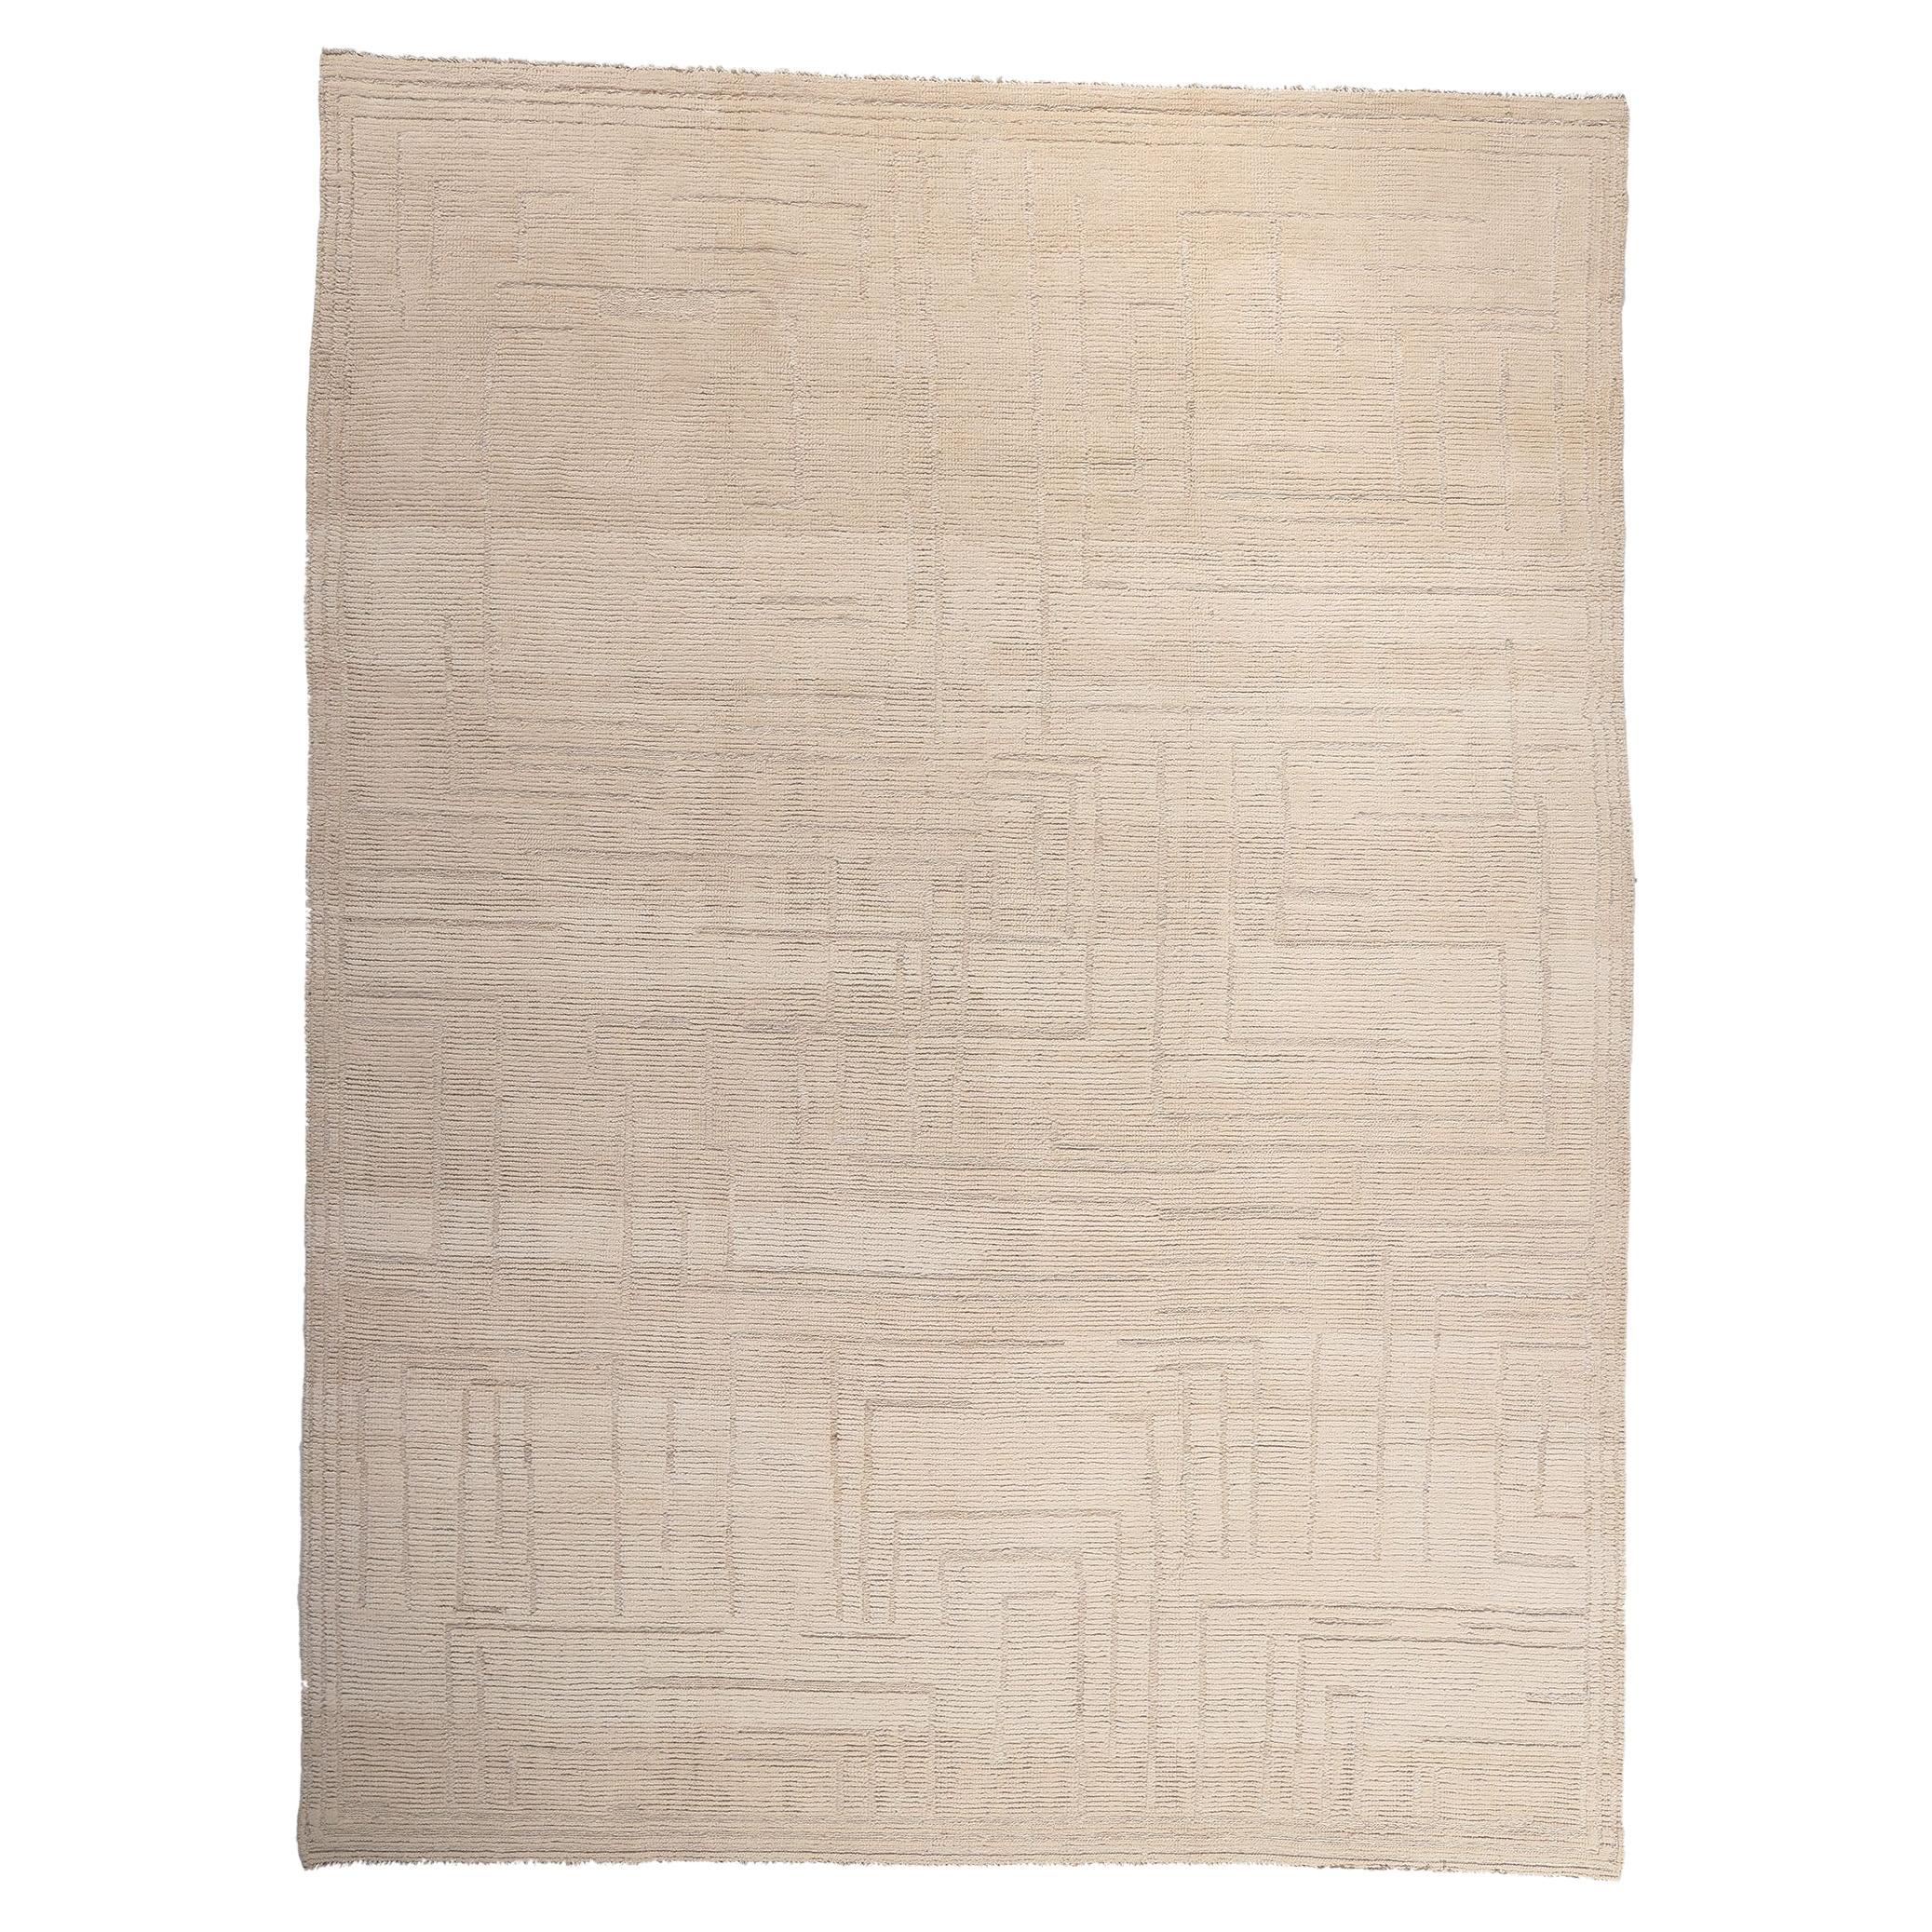 Modern Style Neutral Moroccan Rug, Step Into The Warm Minimalism Of Shibui